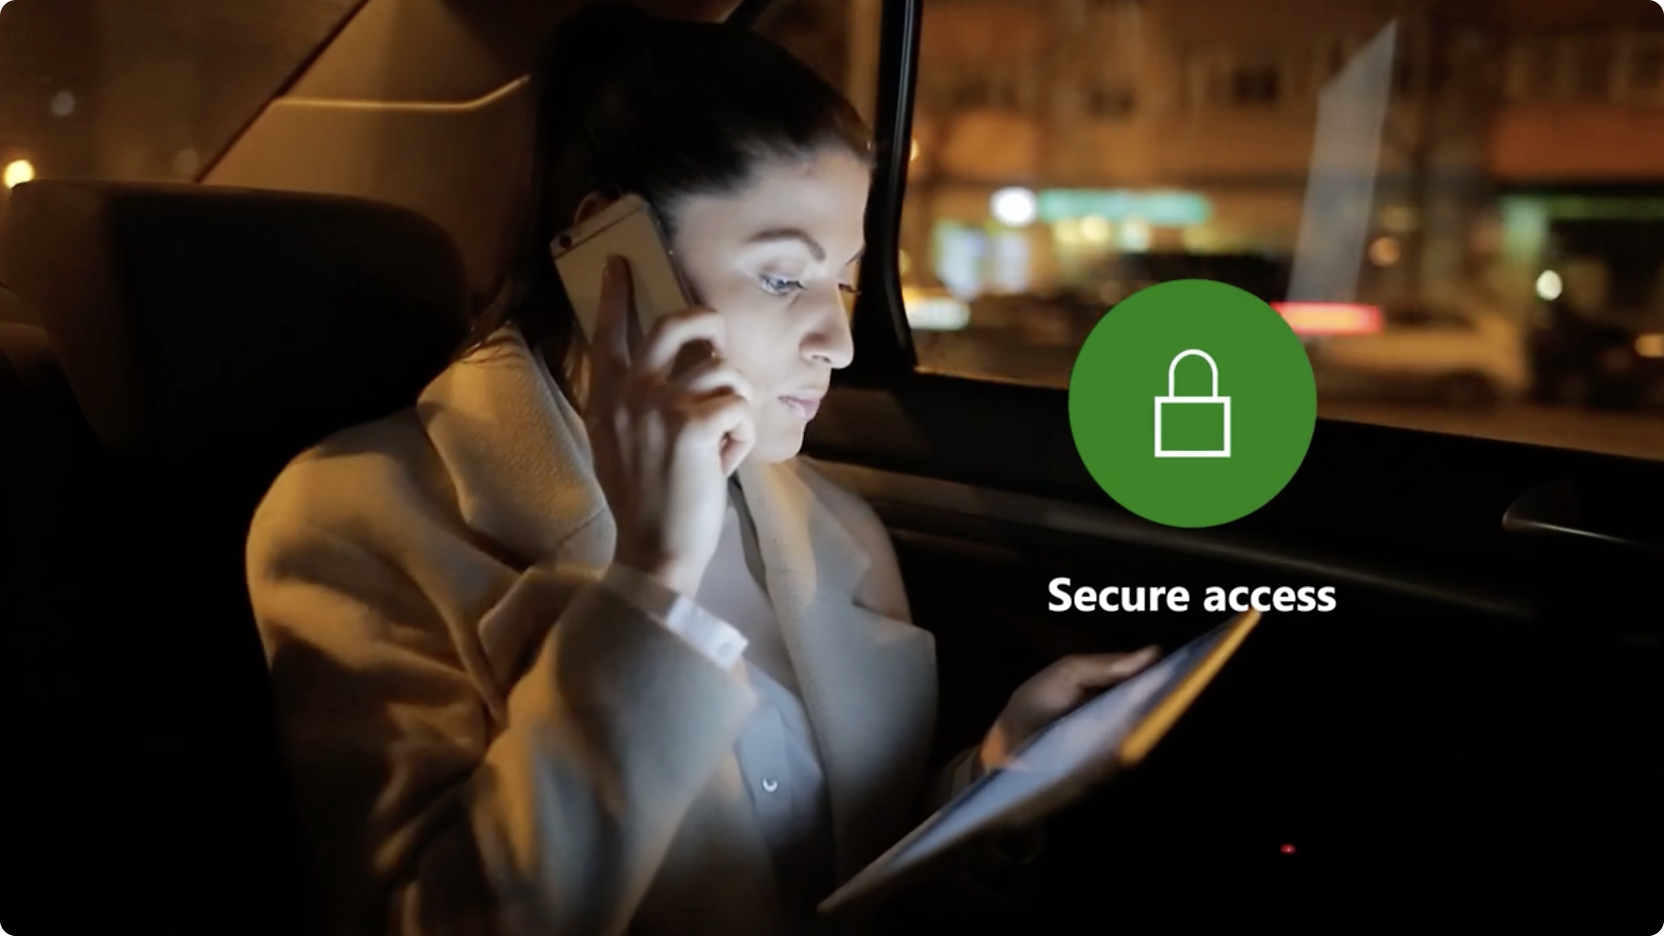 A woman in a car at night speaking on the phone and using a tablet, with a "secure access" icon on the screen.